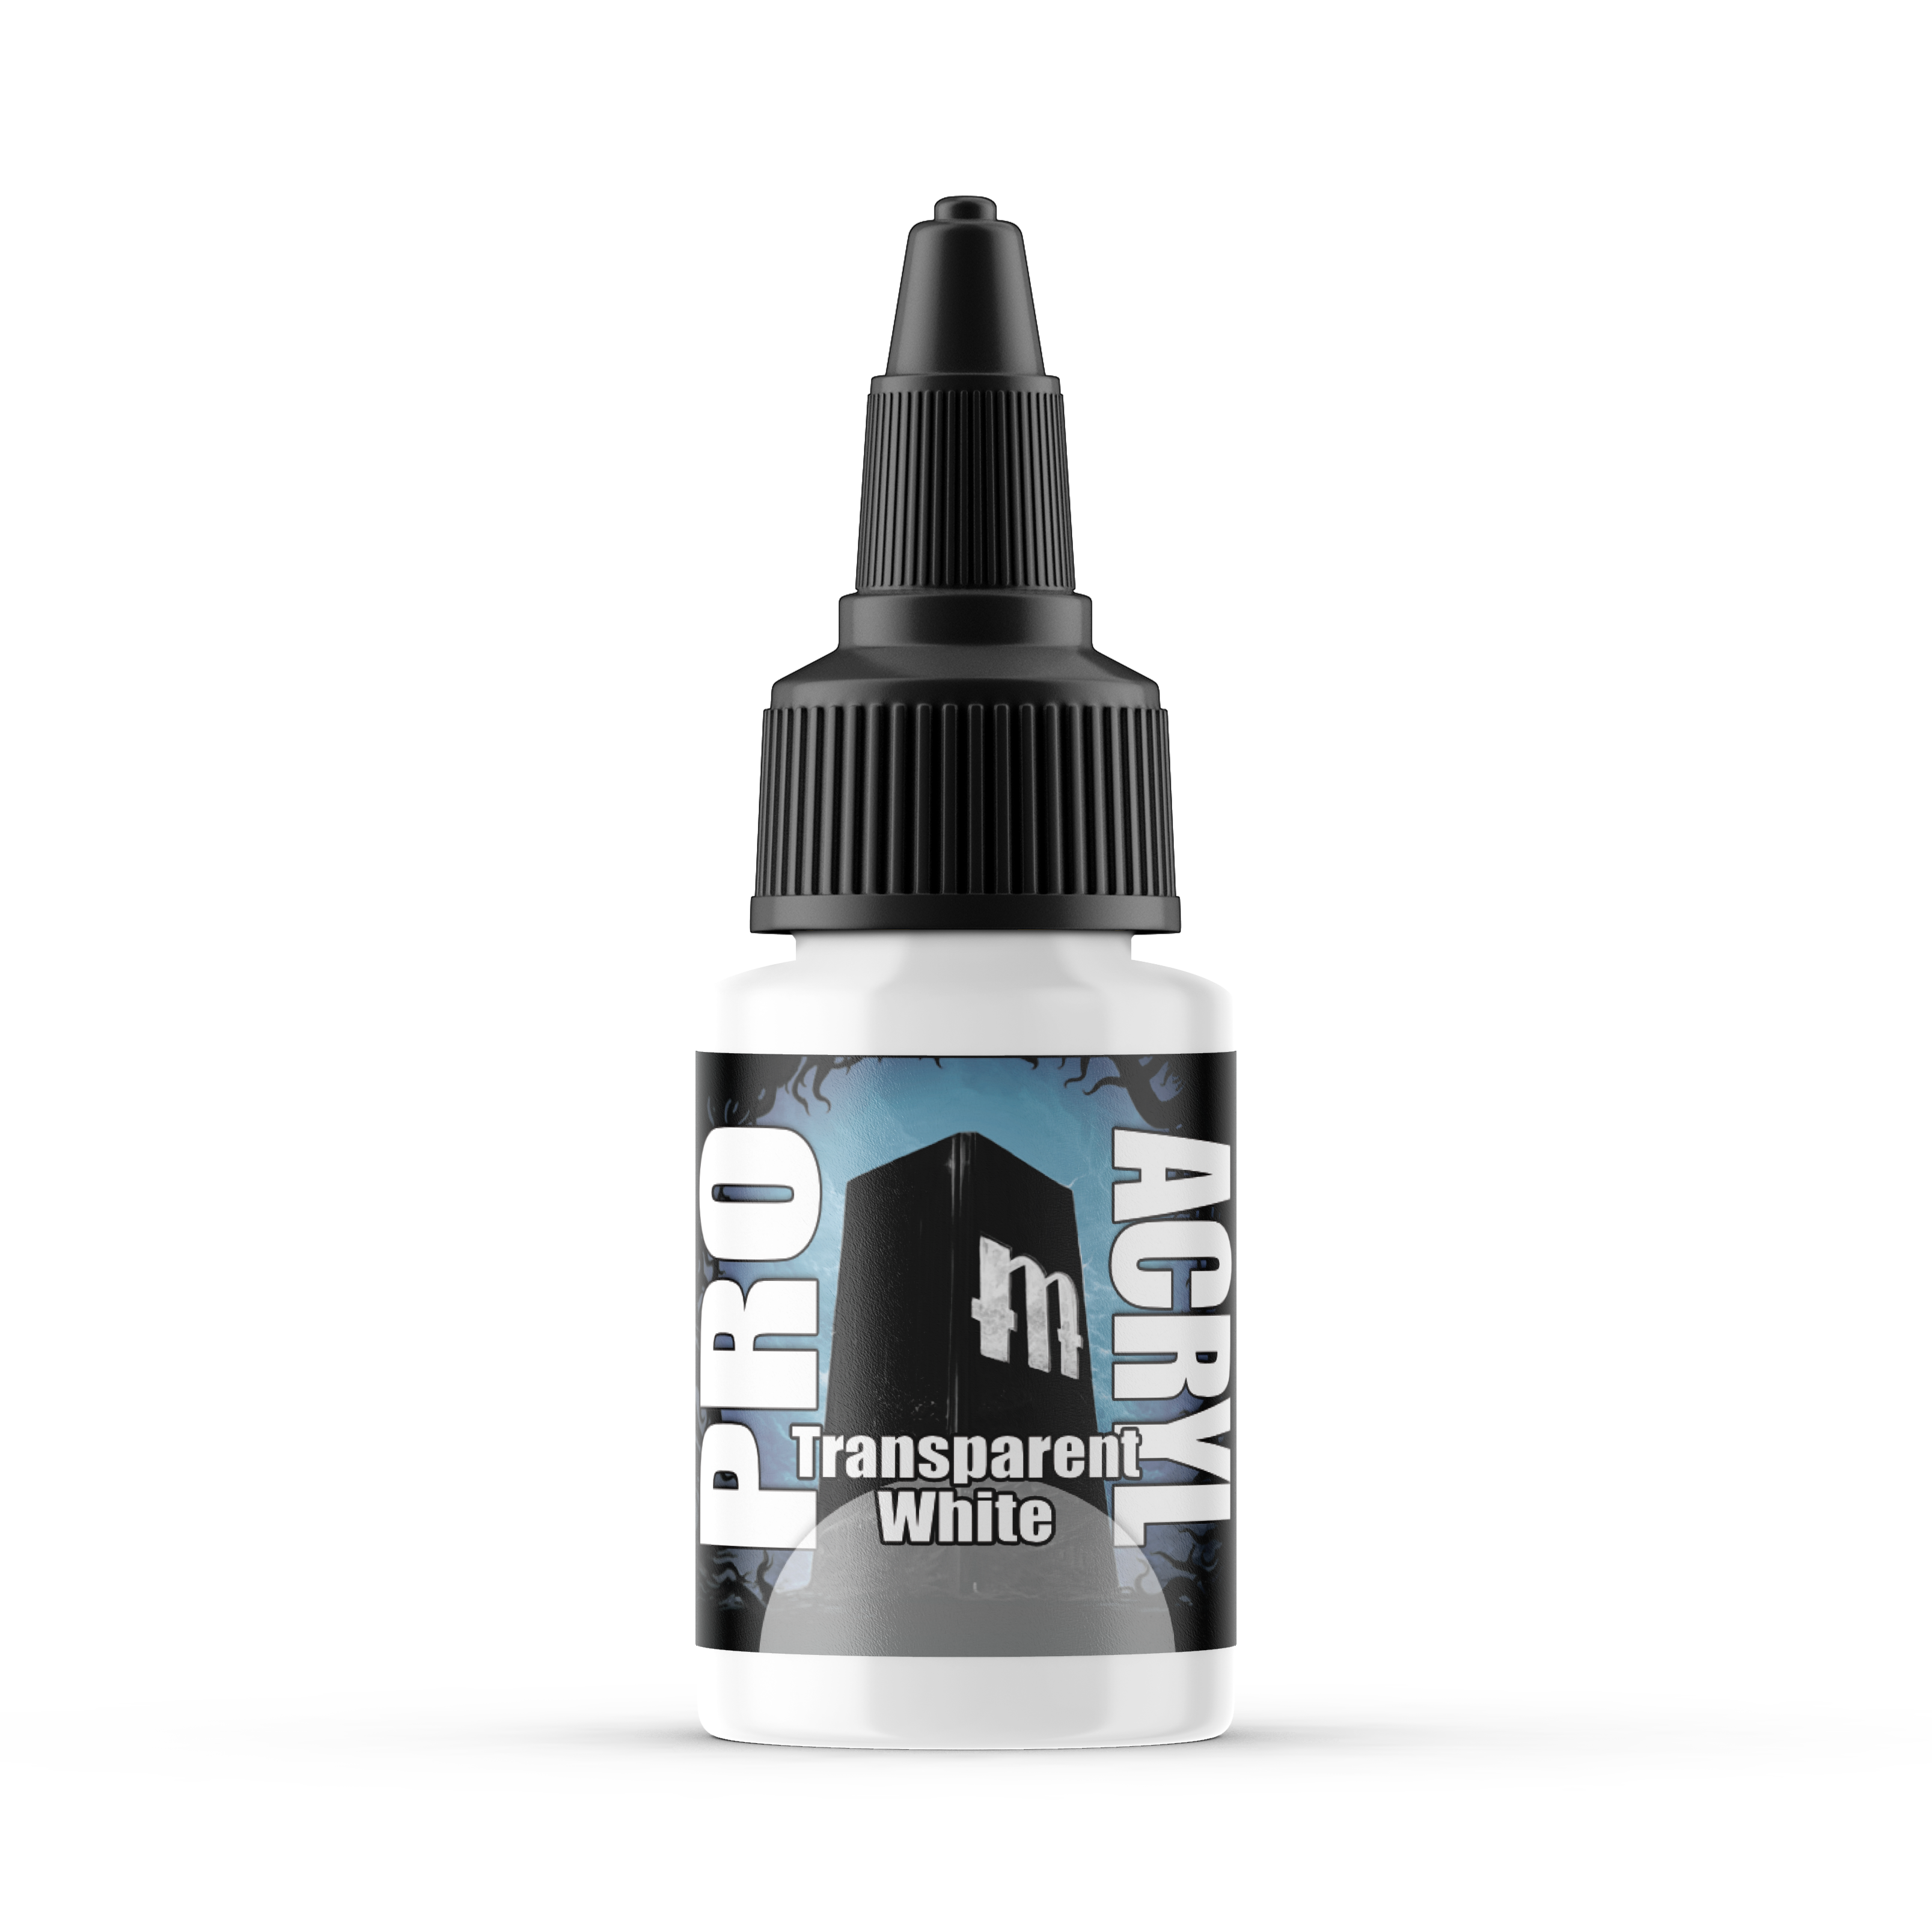  Monument Hobbies Pro Acryl PRIME 003 - White Acrylic Model  Paints for Plastic Models - Miniature Painting : Arts, Crafts & Sewing